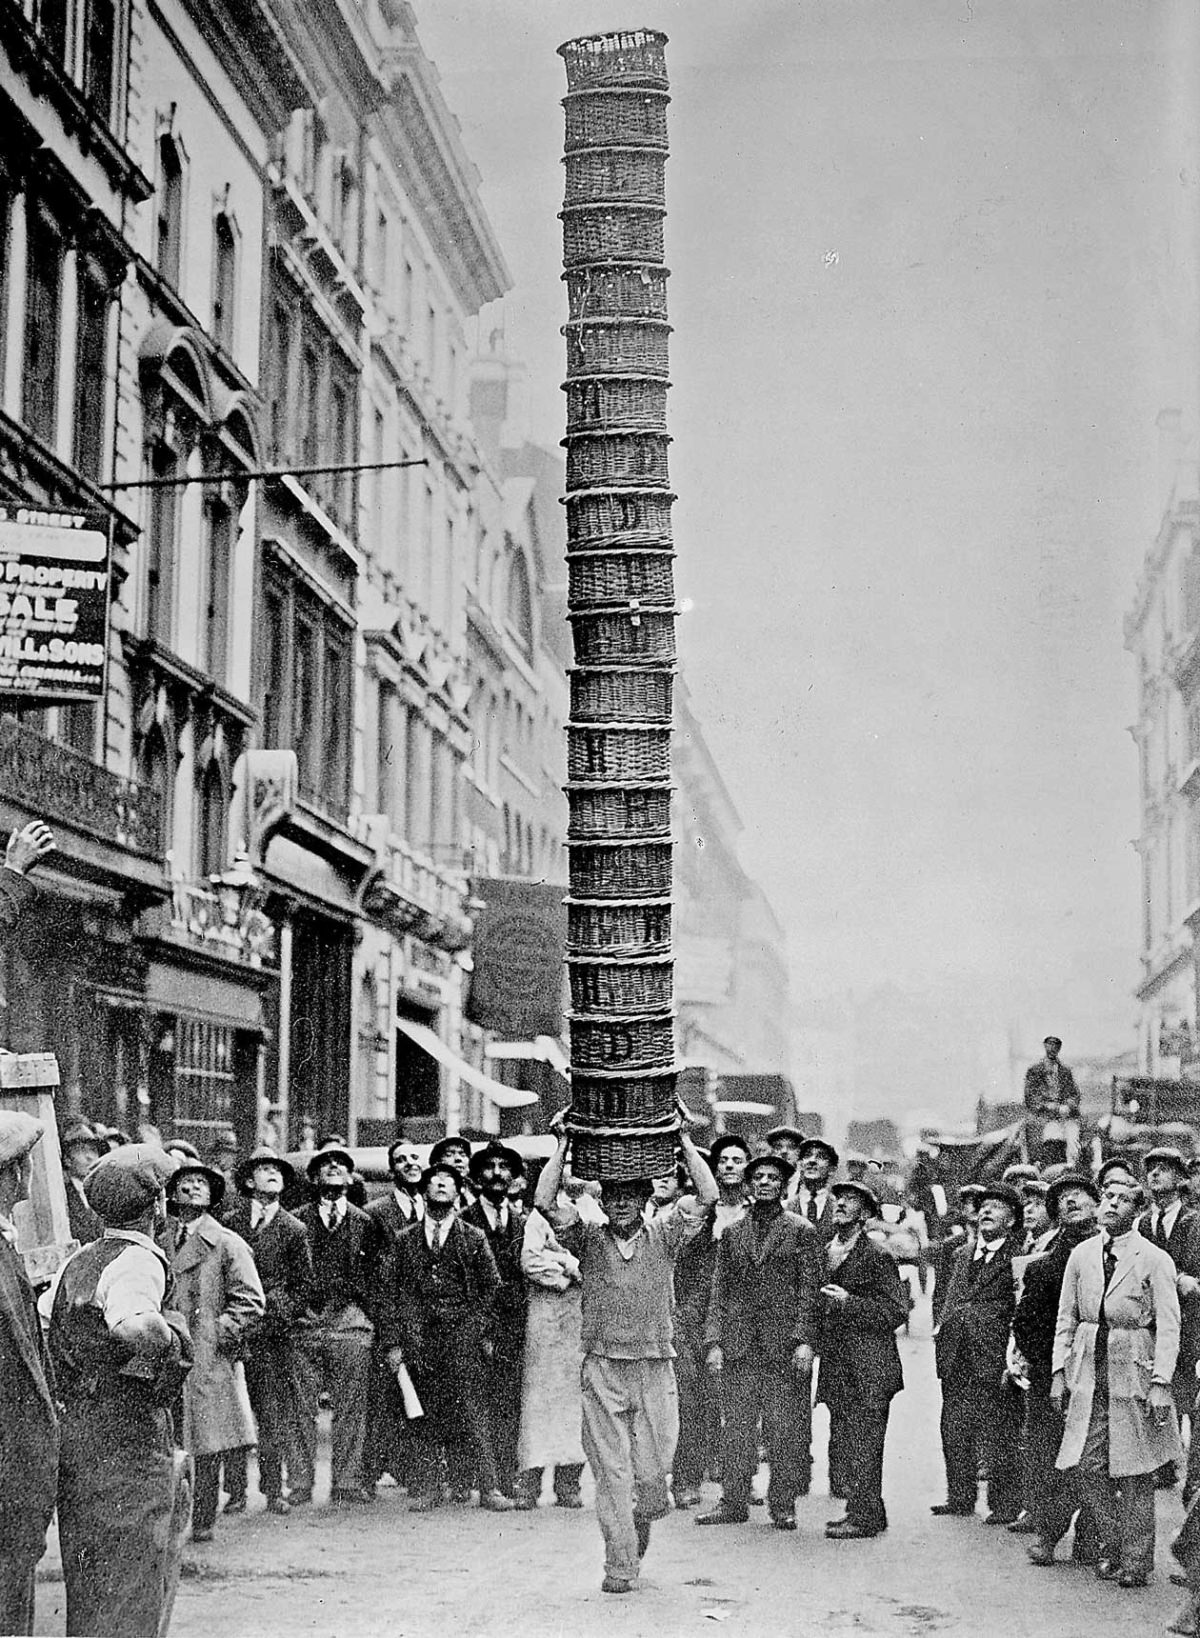 E. W. White, porter, carrying twenty baskets stacked to King Street, Covent Garden, 1931.